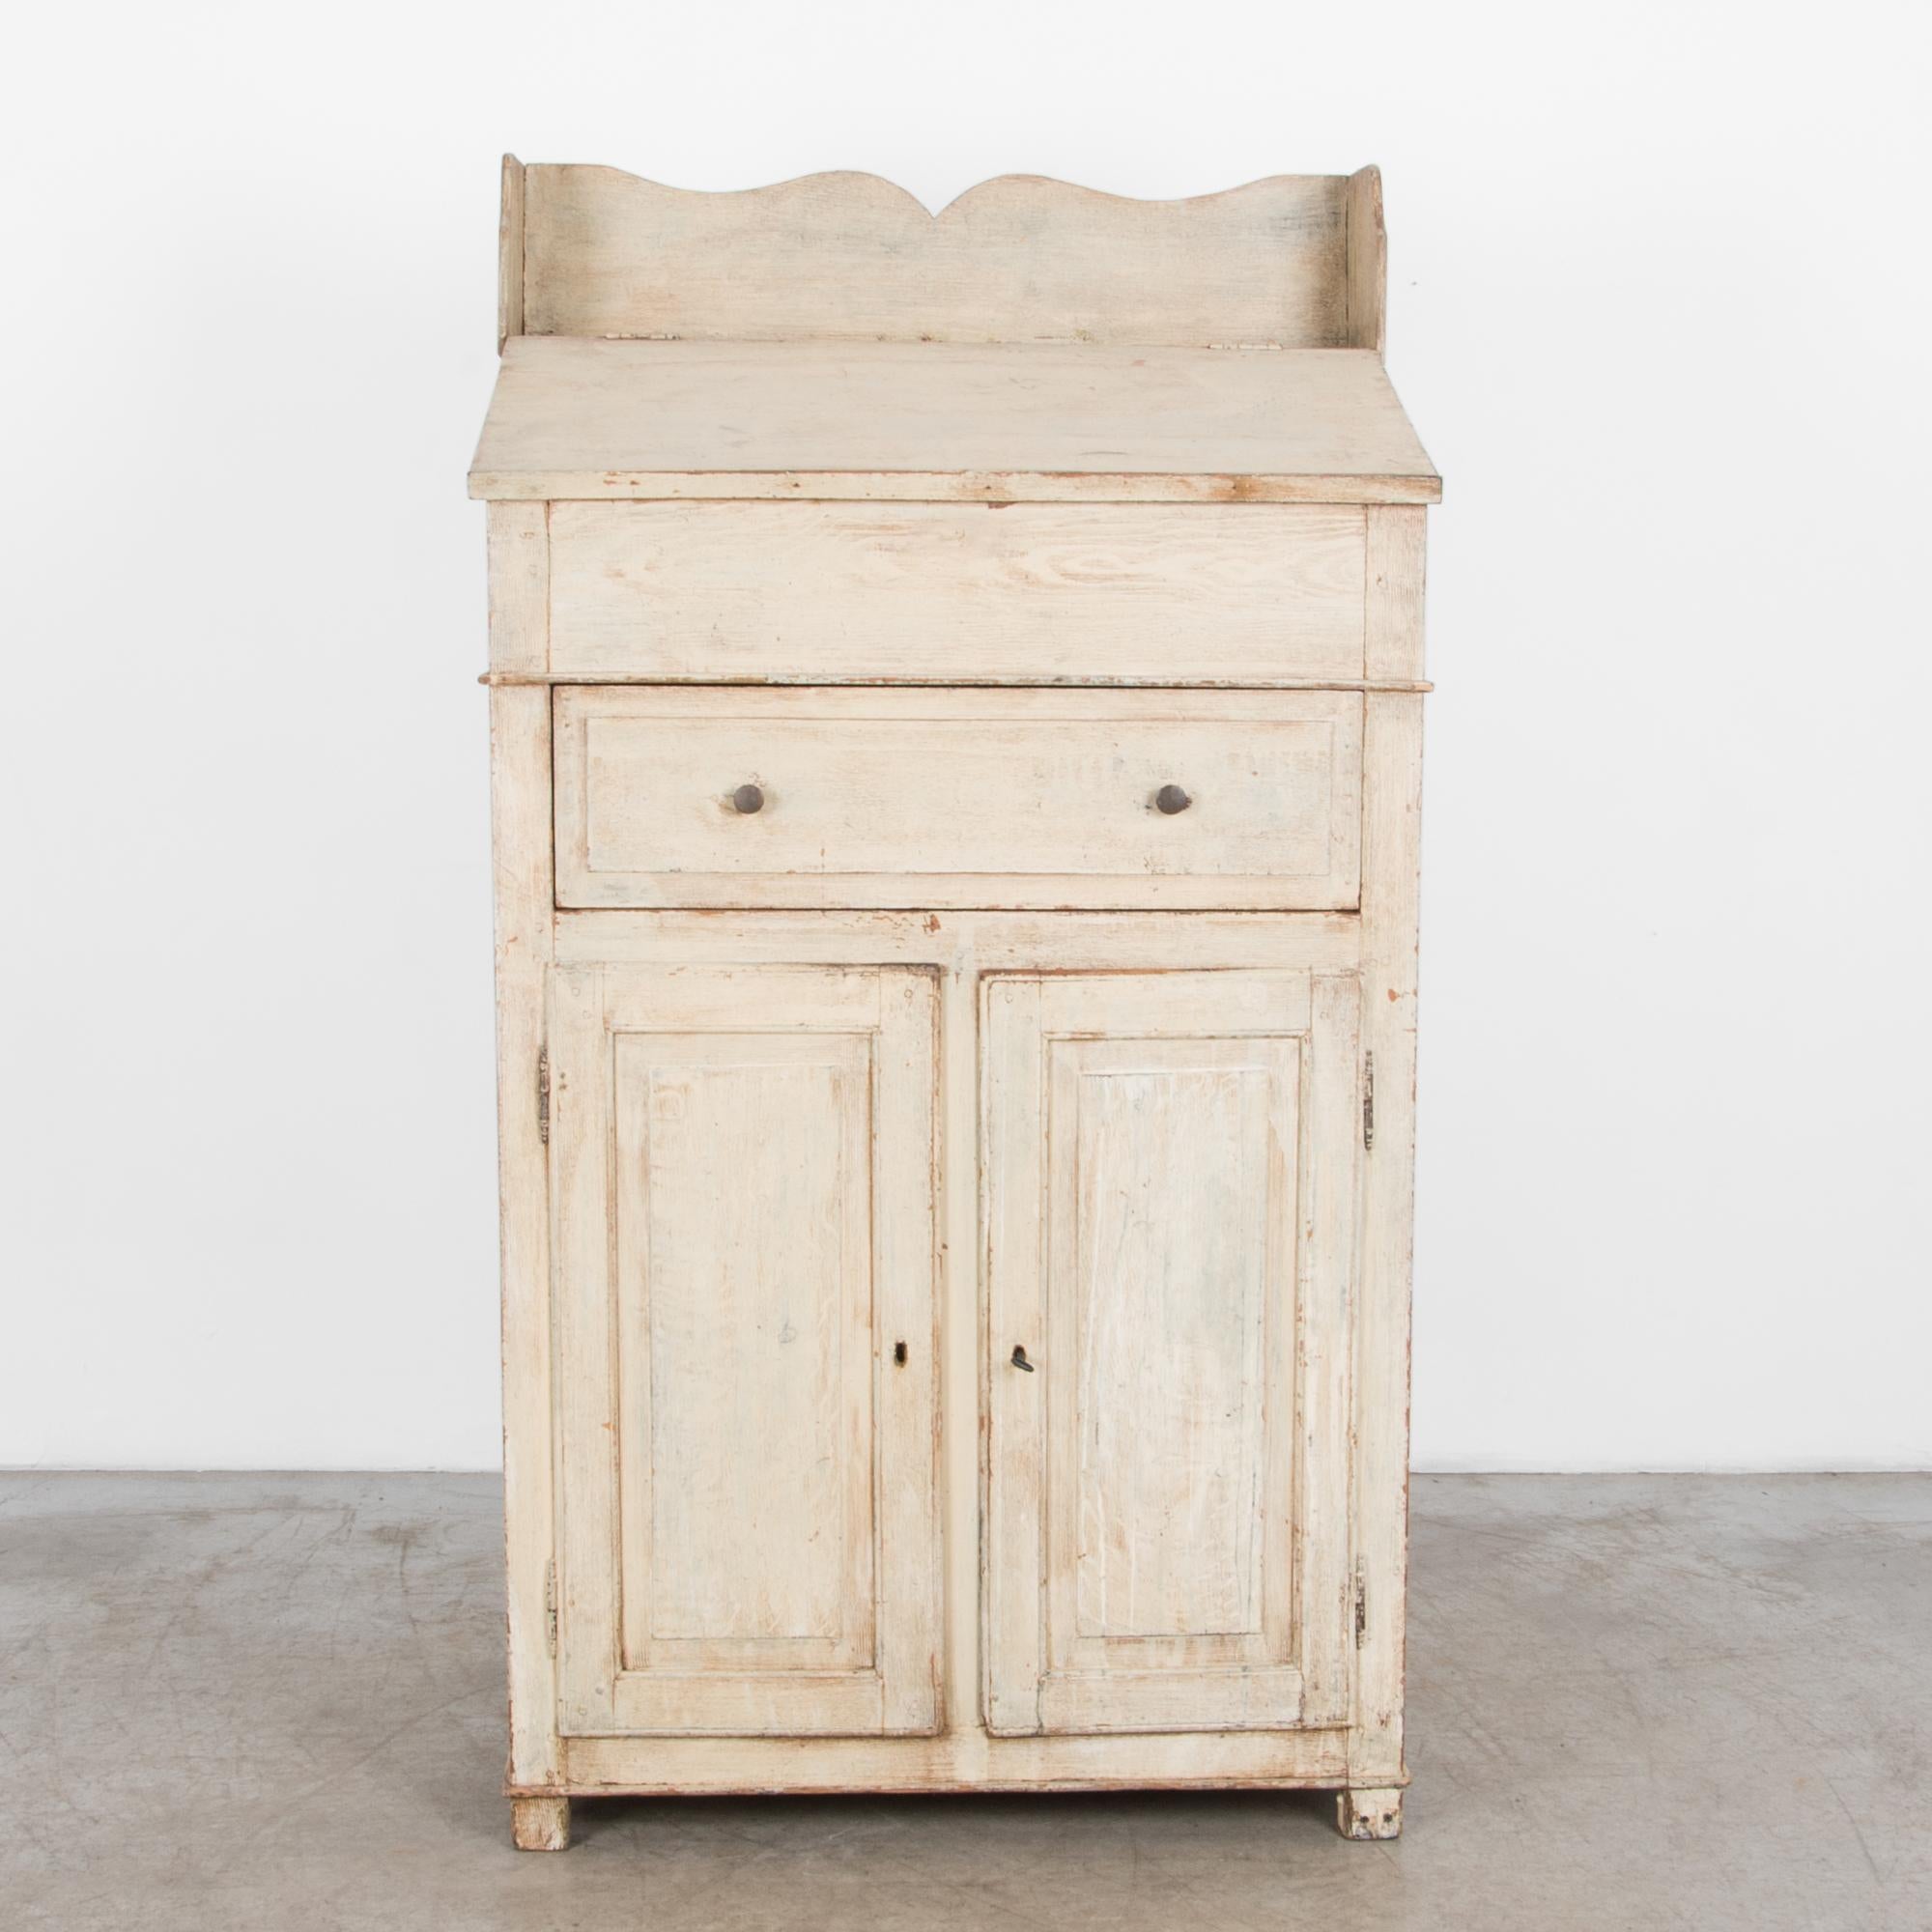 A hardwood secretary cabinet from France, circa 1900. This two-door cabinet features a unique tall desktop. A wooden surround is carved with a subtle scallop, enhancing the patina and shape, casual yet elegant with time worn rustic charm.